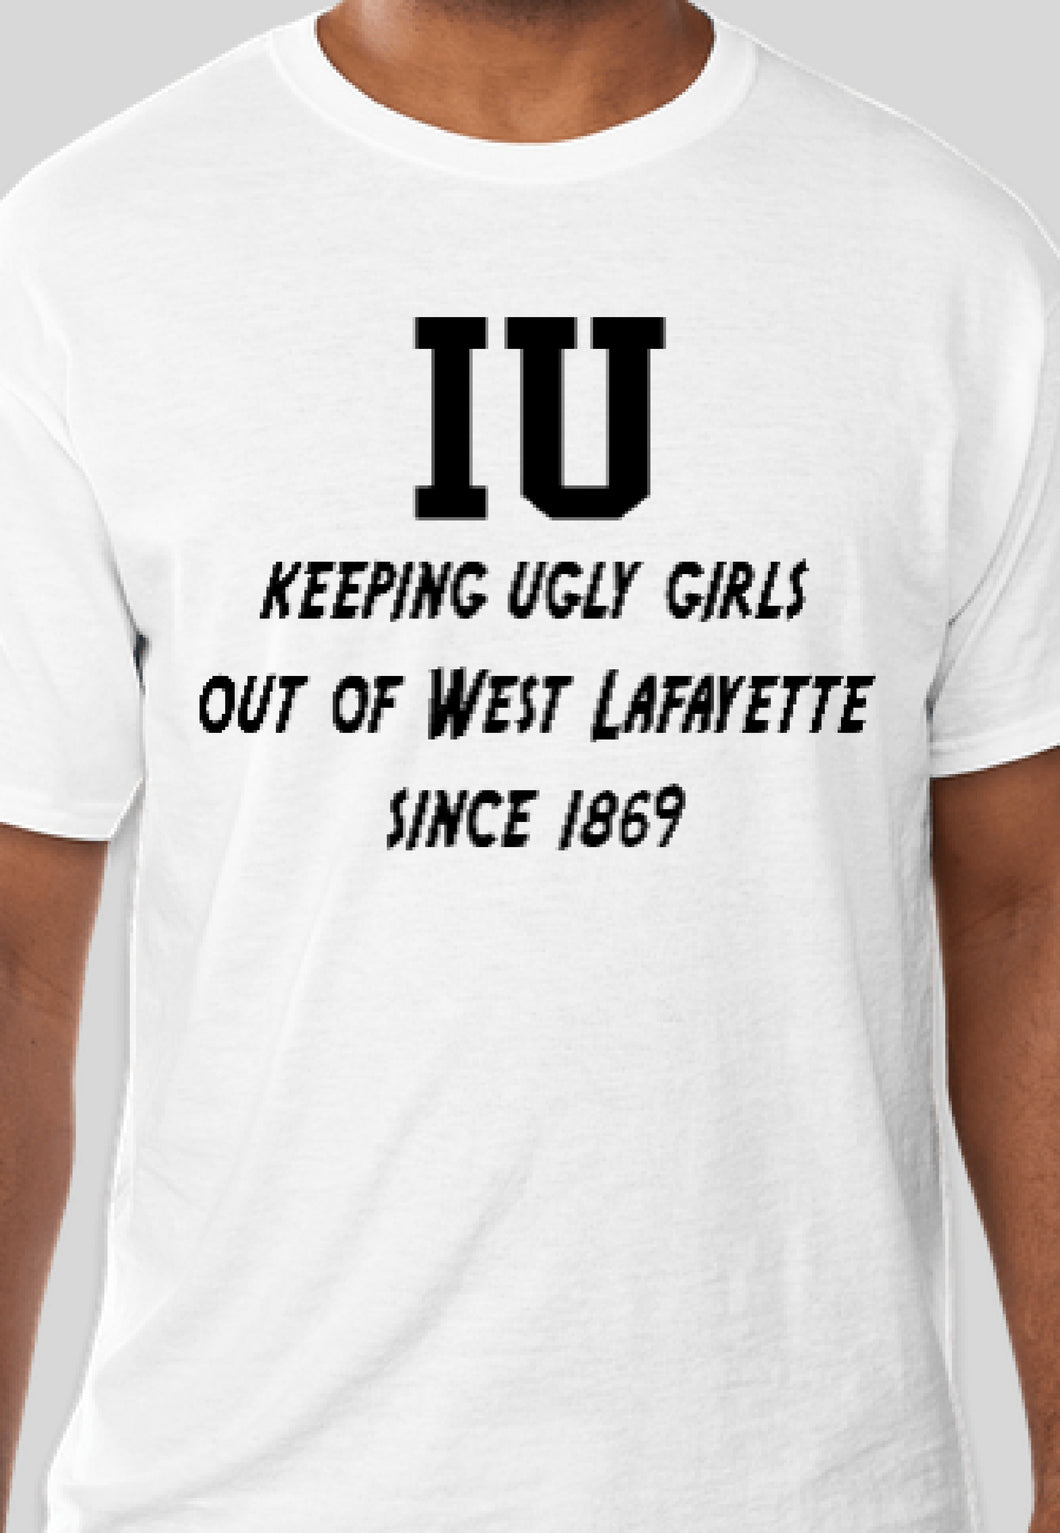 Keeping Ugly Girls Out of West Lafayette Since 1869